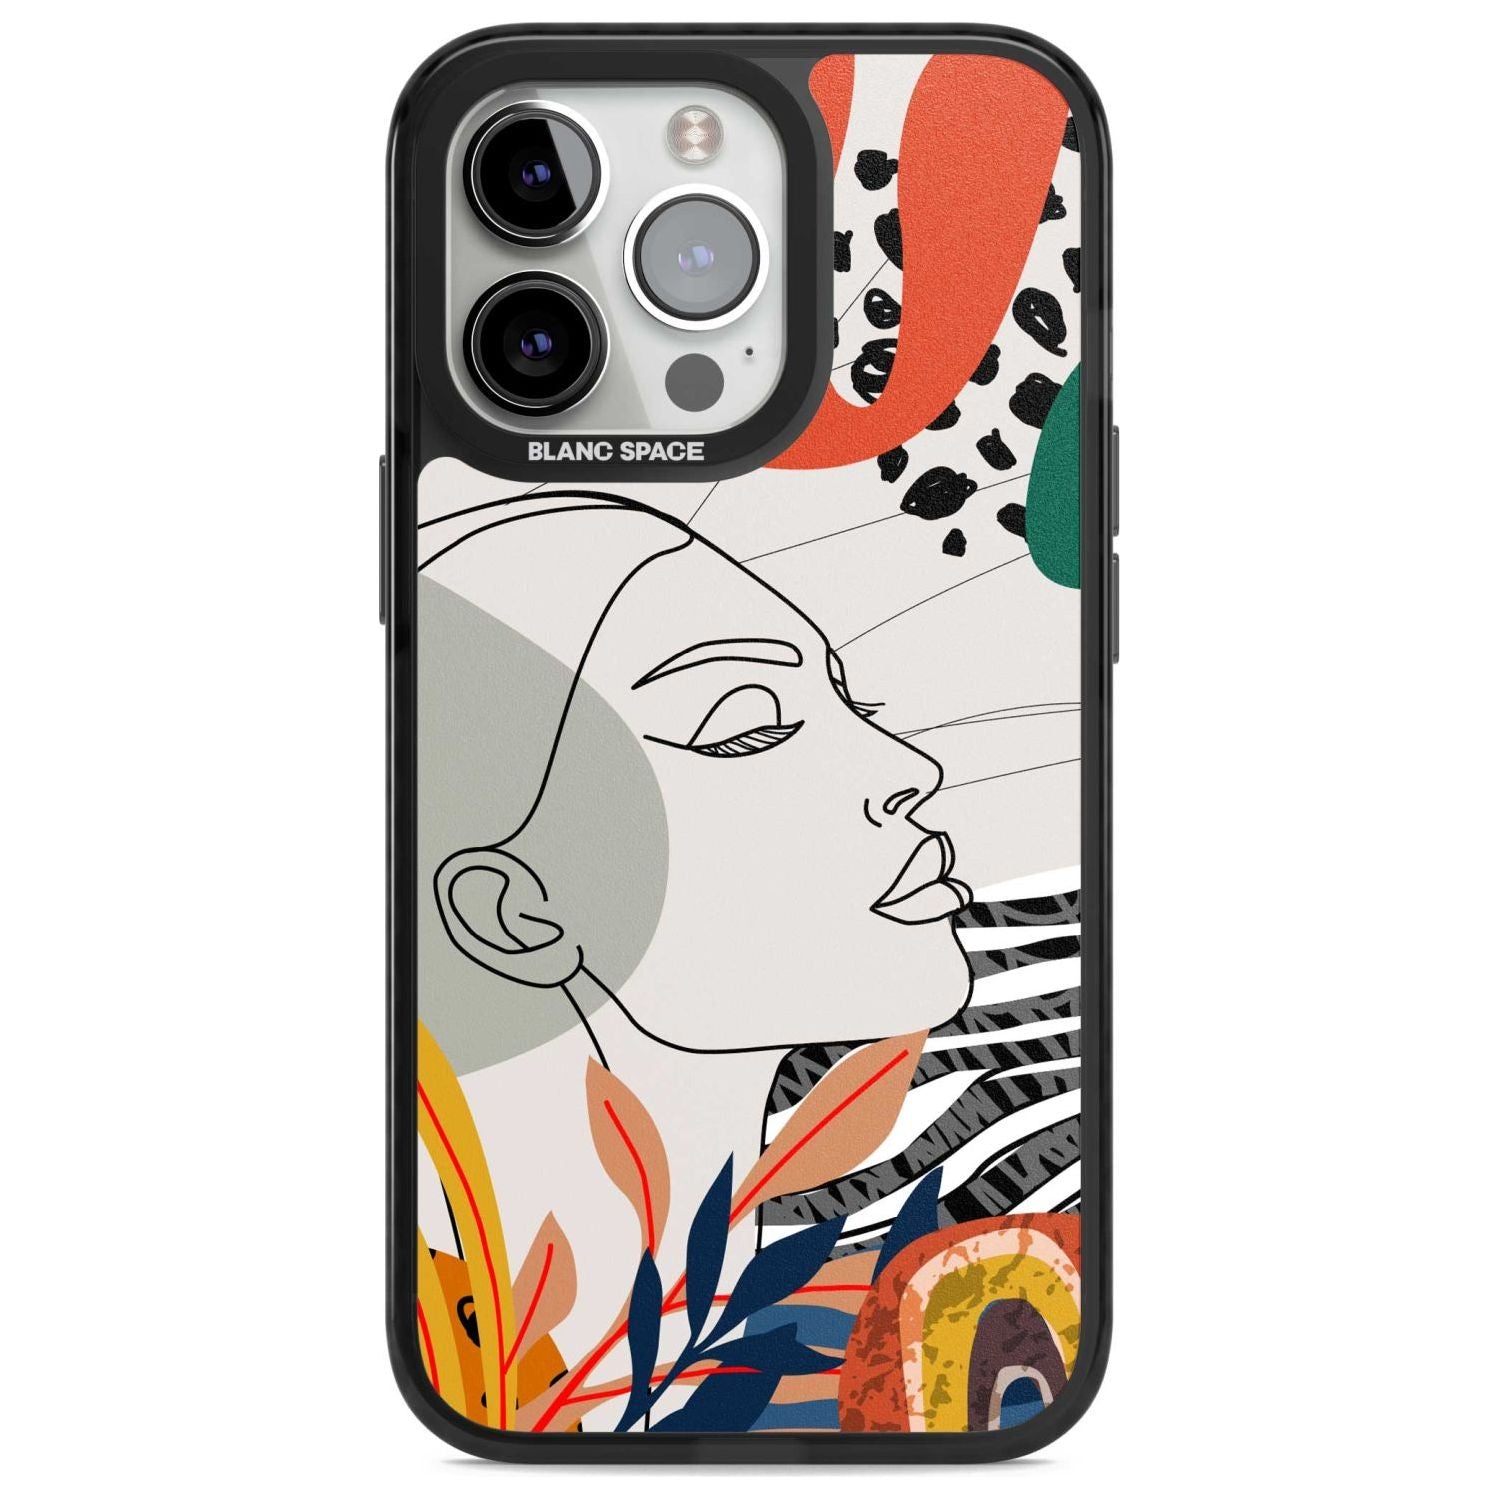 Girl Gone Wild Phone Case iPhone 15 Pro Max / Magsafe Black Impact Case,iPhone 15 Pro / Magsafe Black Impact Case,iPhone 14 Pro Max / Magsafe Black Impact Case,iPhone 14 Pro / Magsafe Black Impact Case,iPhone 13 Pro / Magsafe Black Impact Case Blanc Space